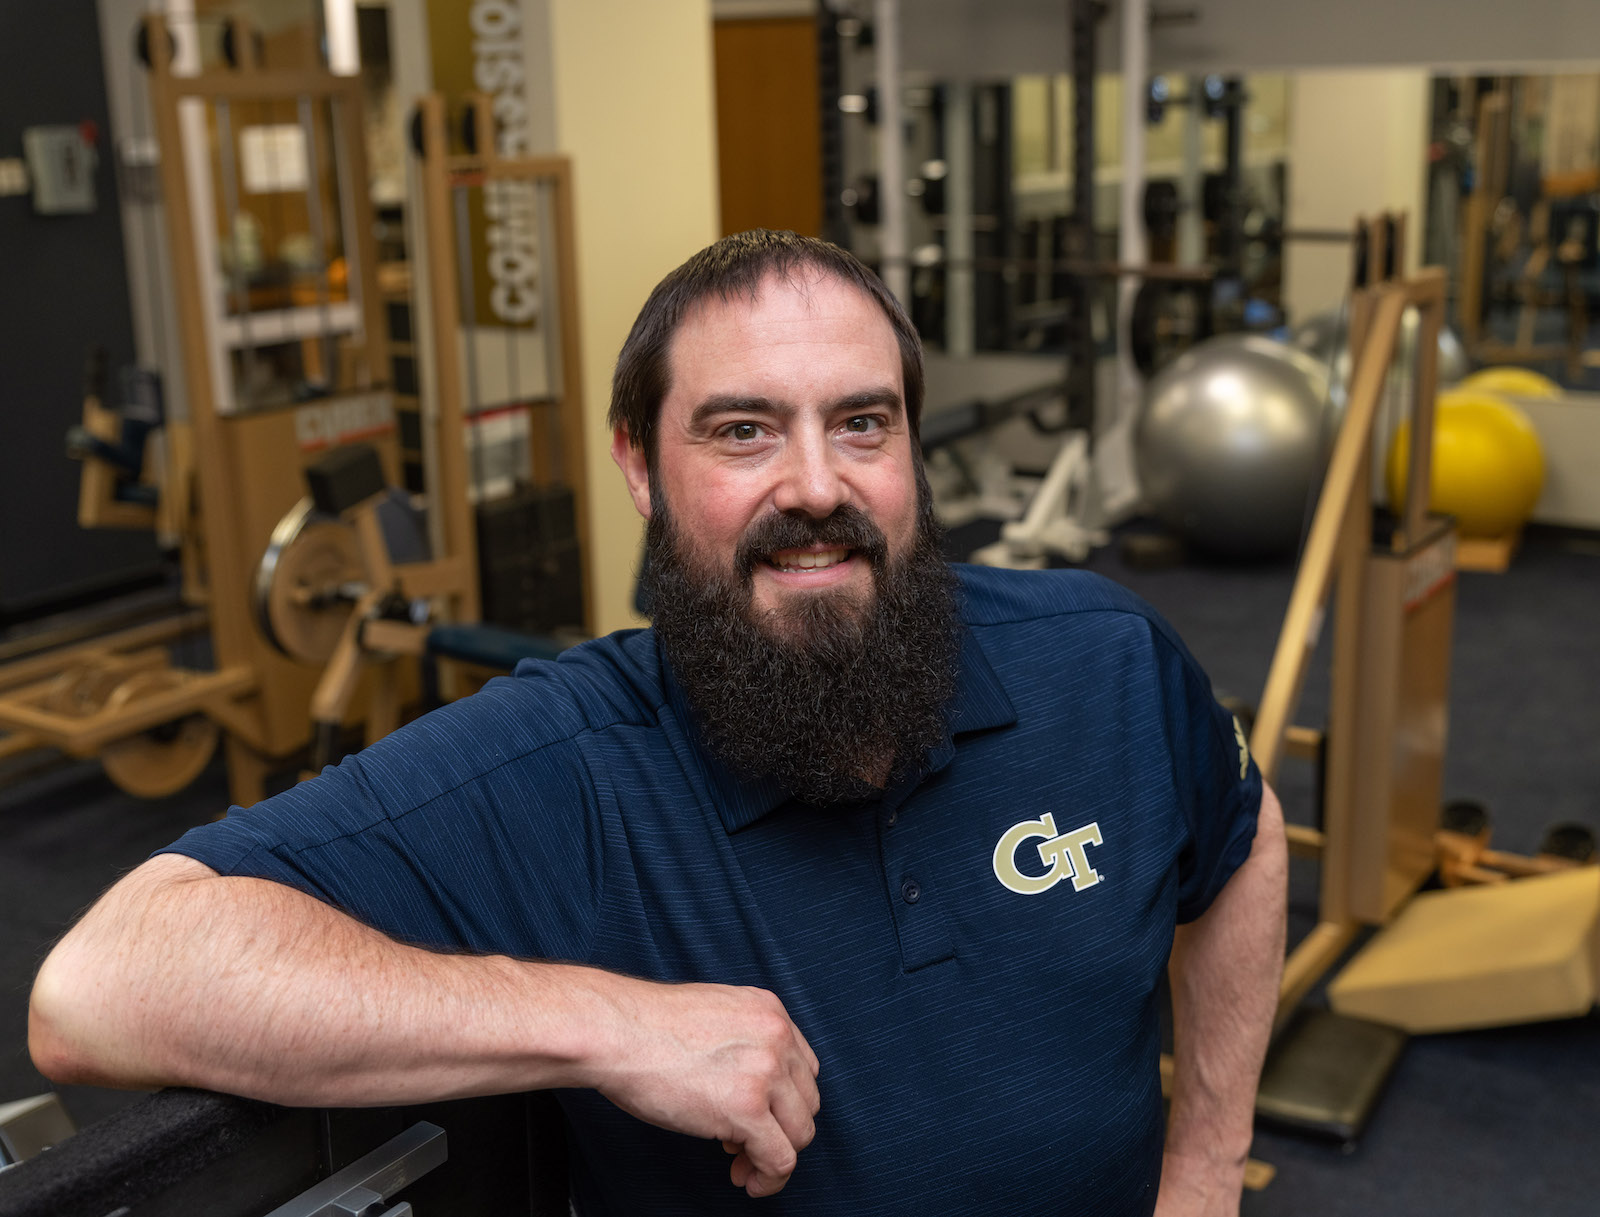 Charlie Ridgeway is a physical therapist on staff at the Homer Rice Center for Sport's Performance. Photo by Rob Felt.